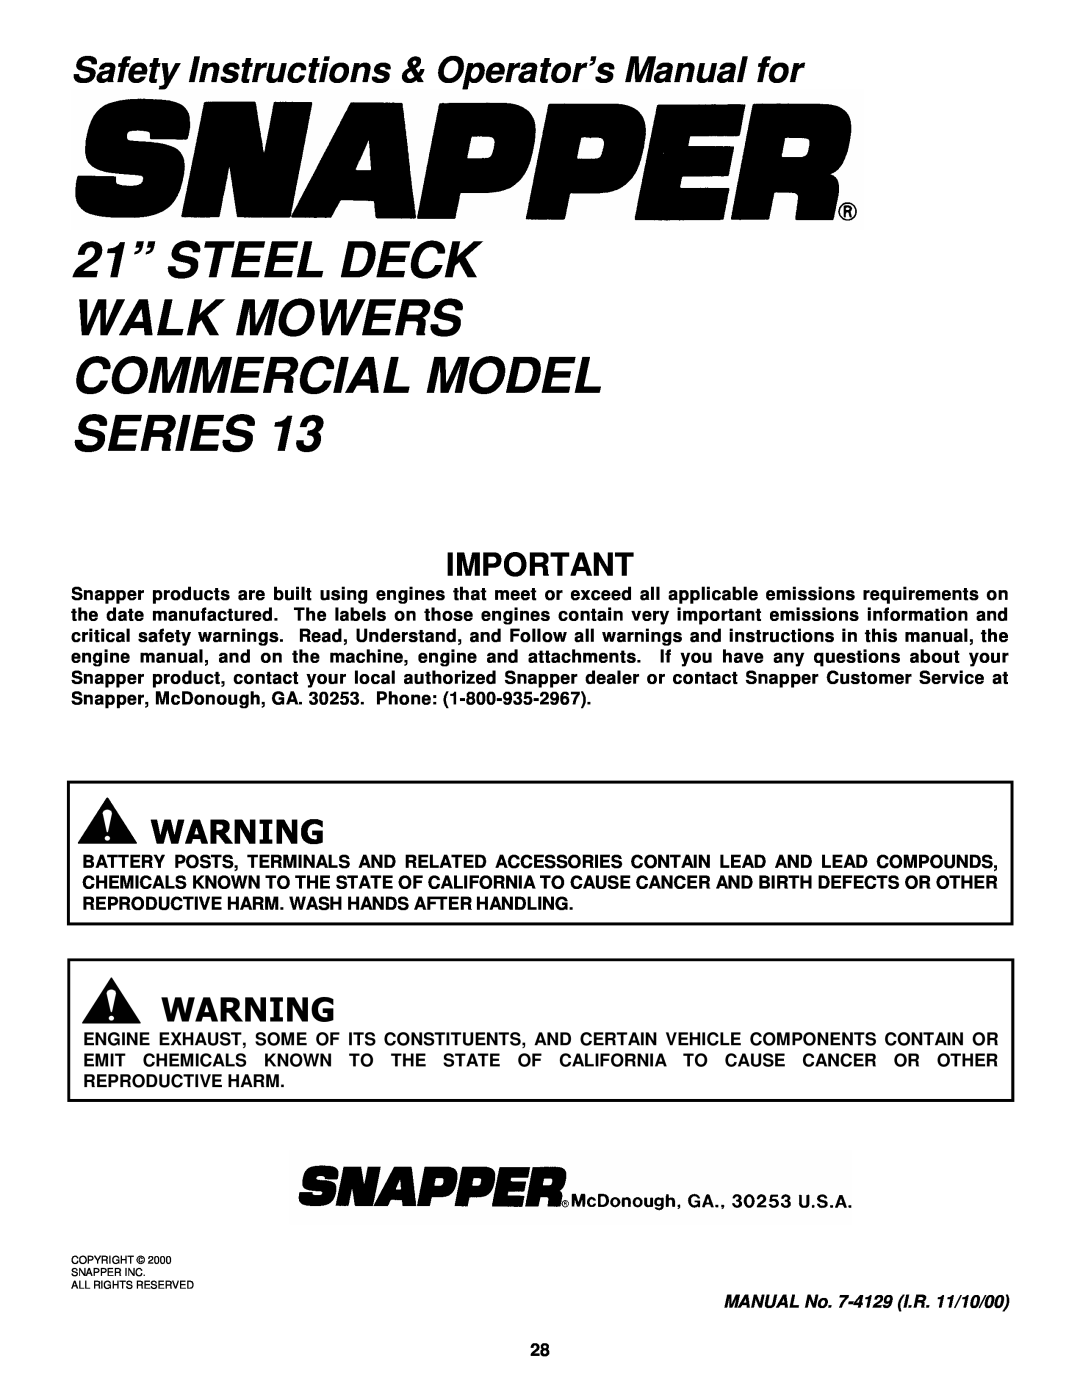 Snapper CP214012R2 21” STEEL DECK WALK MOWERS COMMERCIAL MODEL SERIES, Safety Instructions & Operator’s Manual for 